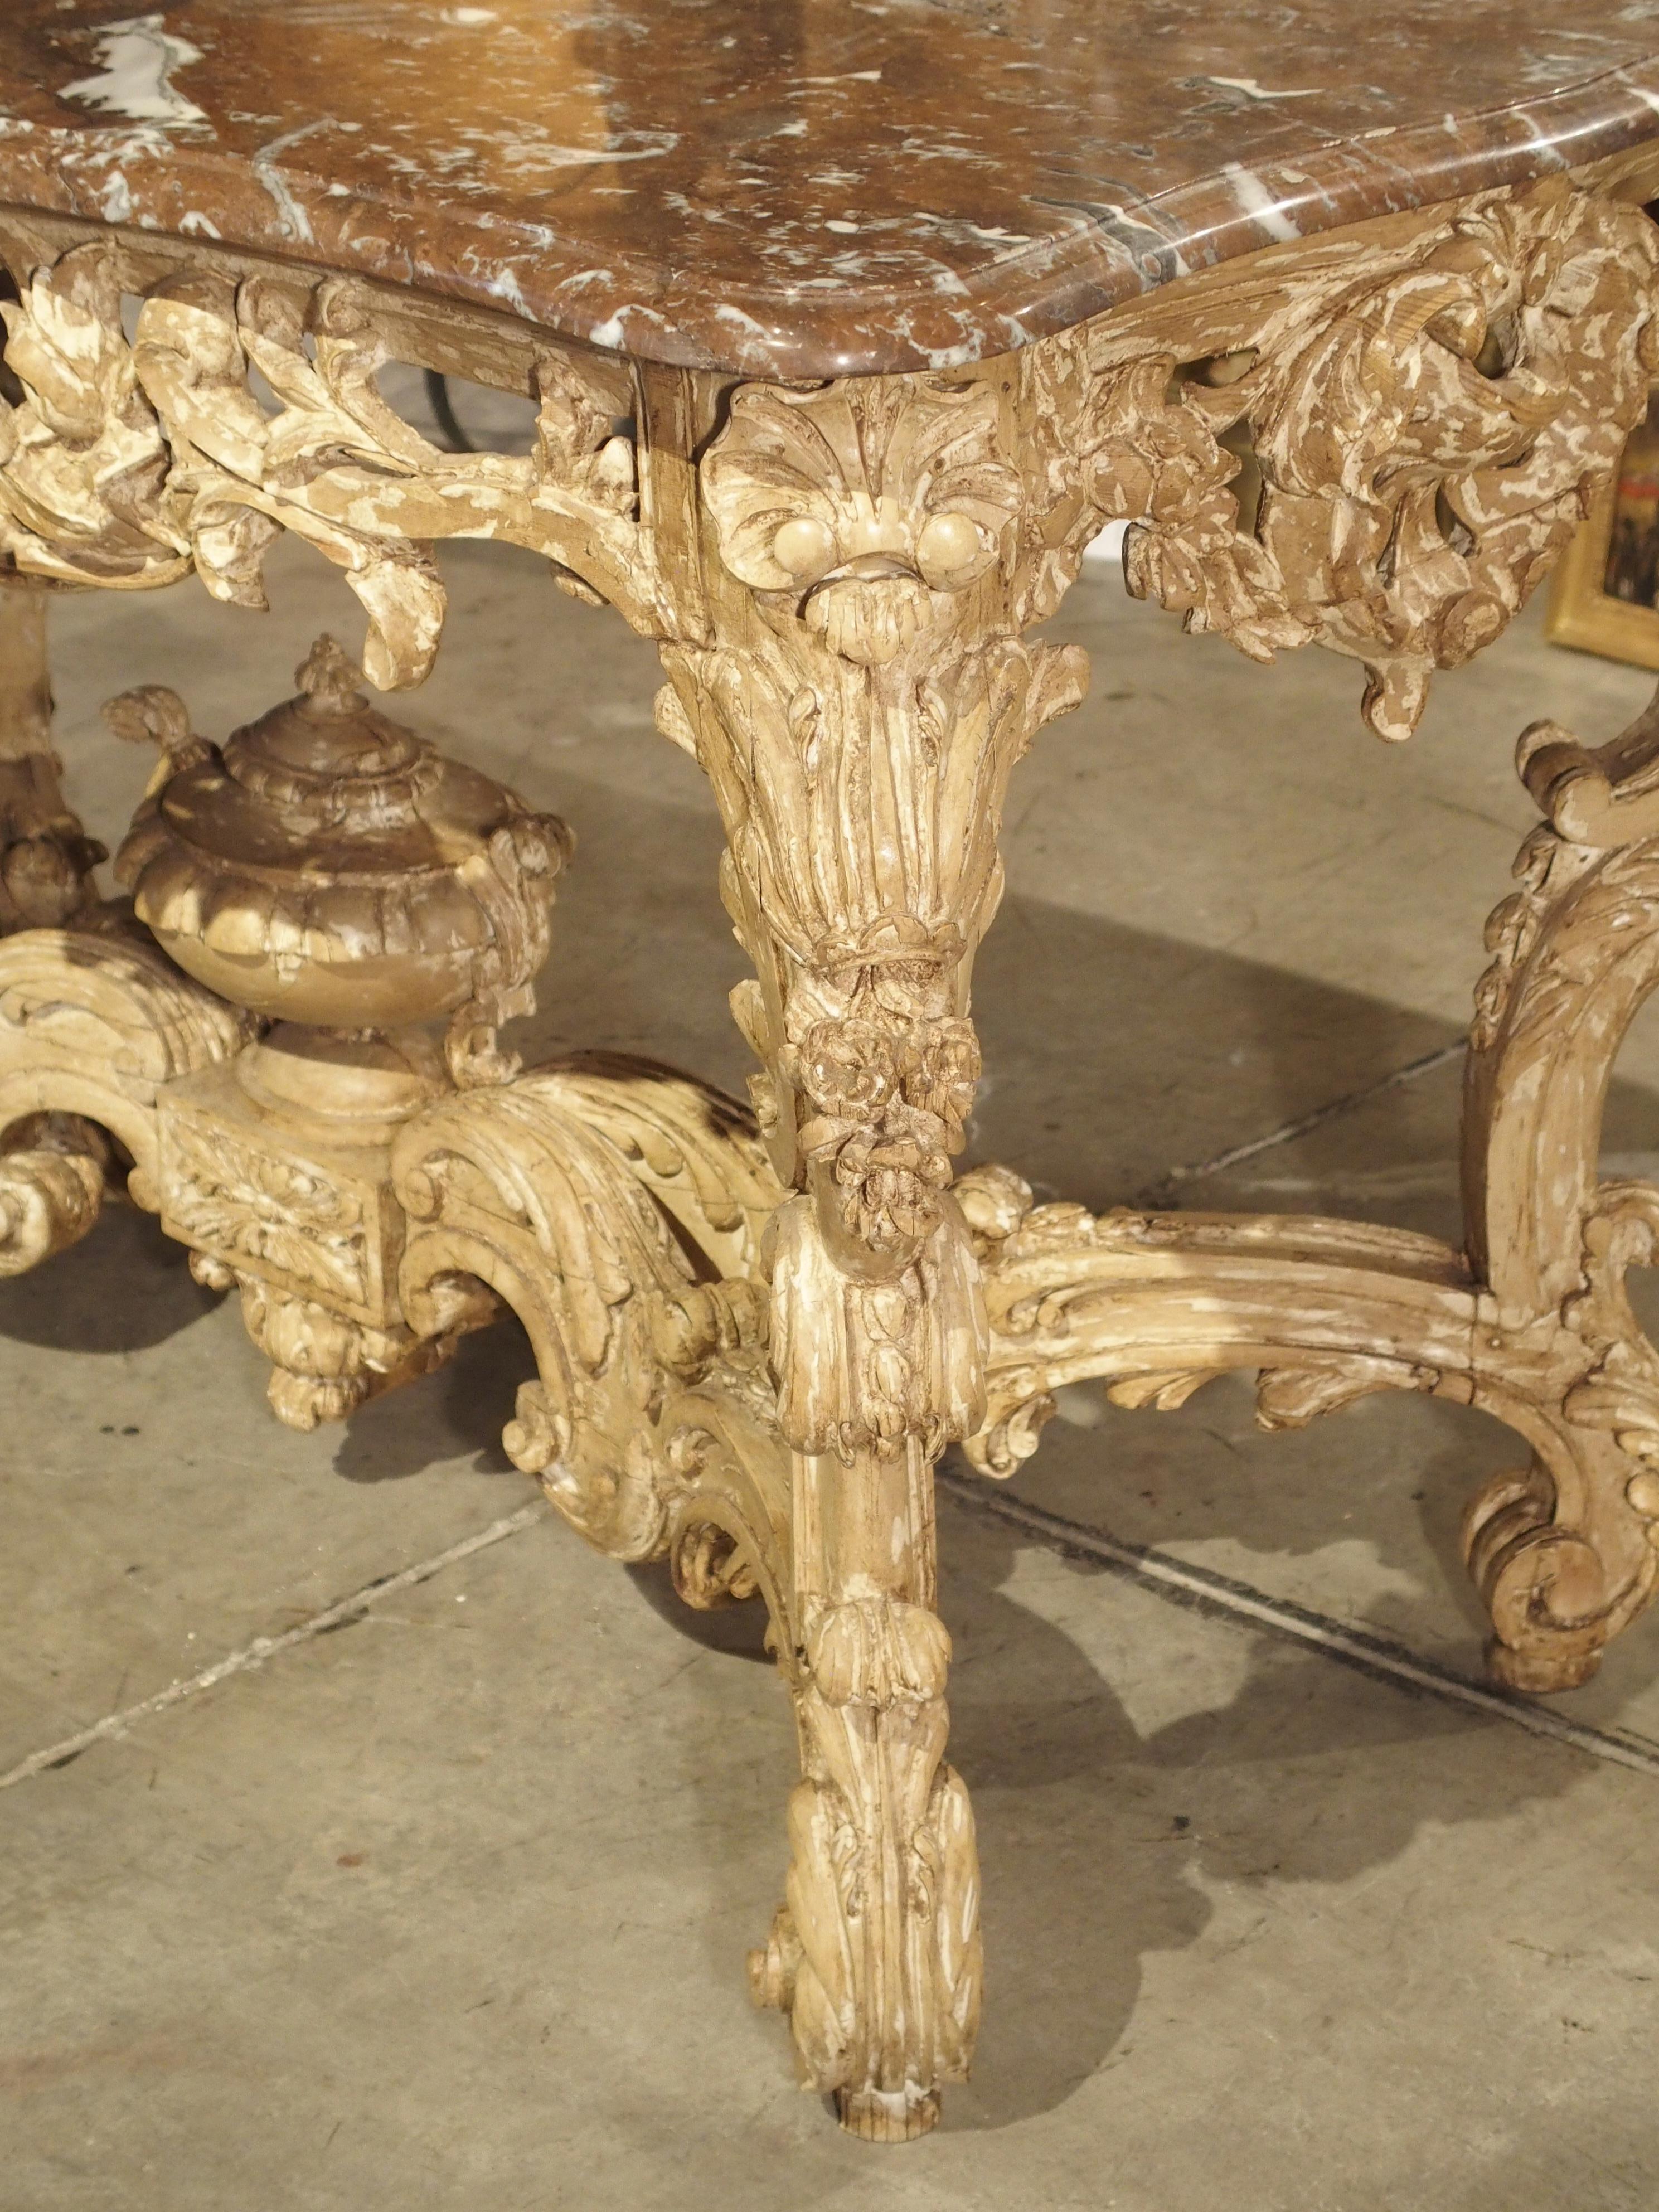 This elegant and beautifully carved wooden center table from France incorporates design elements from two of the most popular French periods.

The intricate hand carved base exhibits aspects of the Rococo style: highly ornamental with asymmetrical